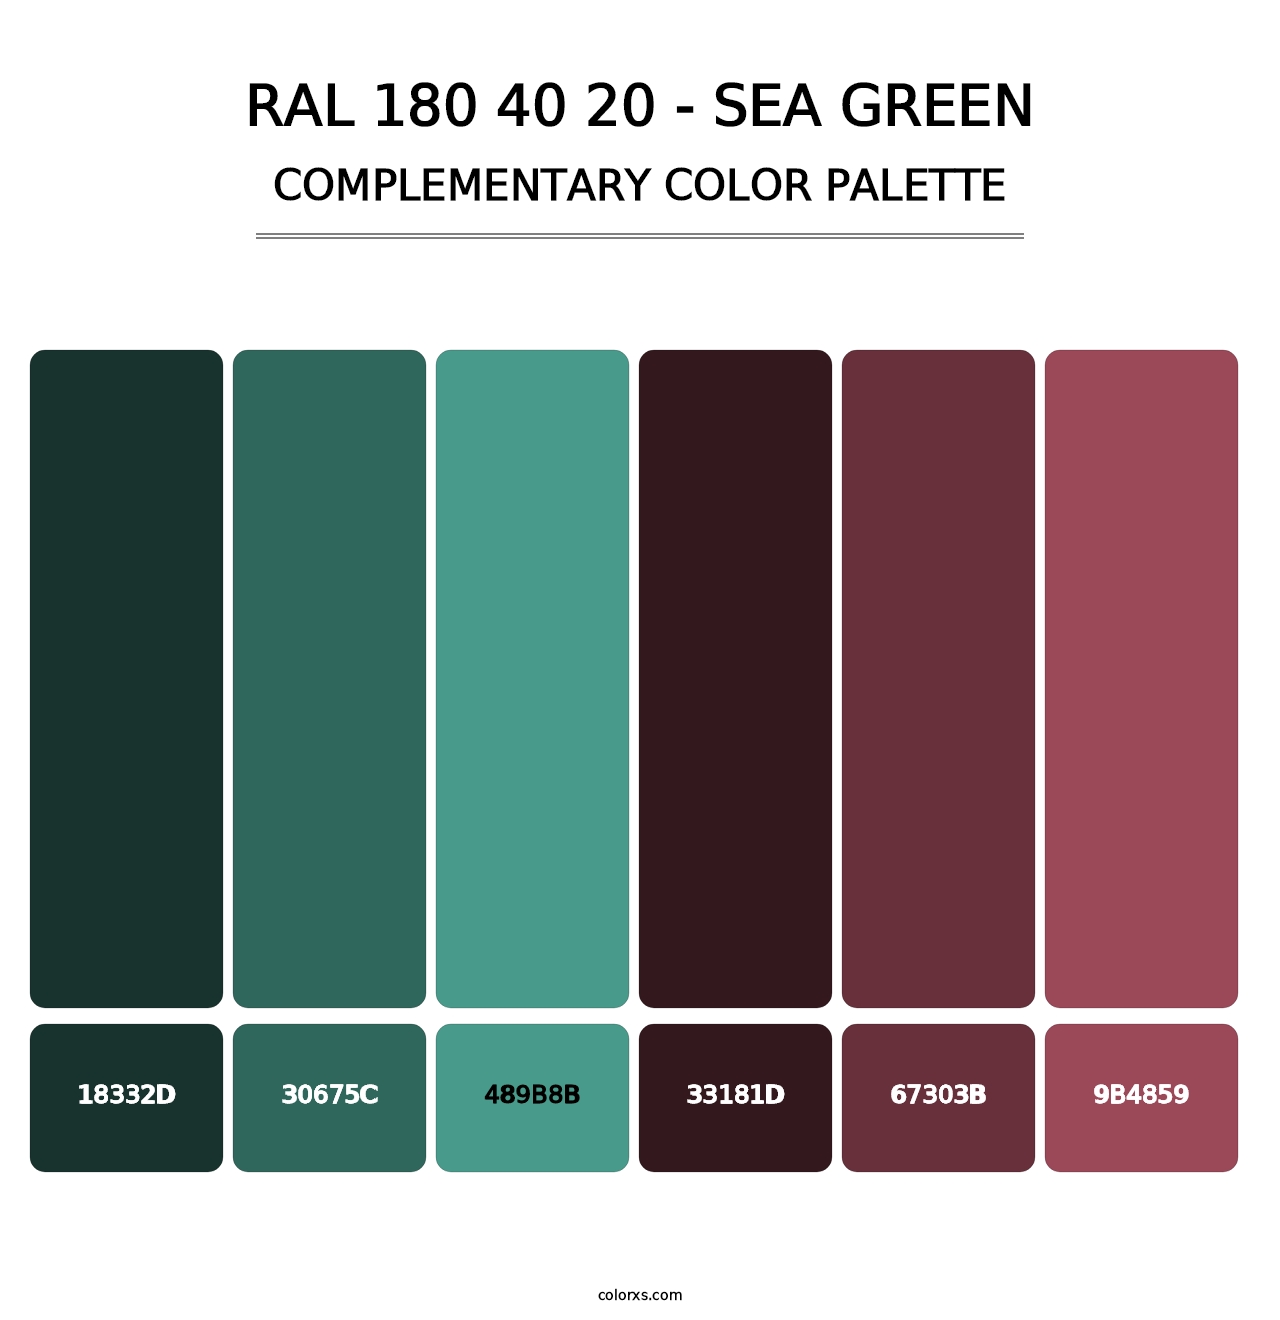 RAL 180 40 20 - Sea Green - Complementary Color Palette